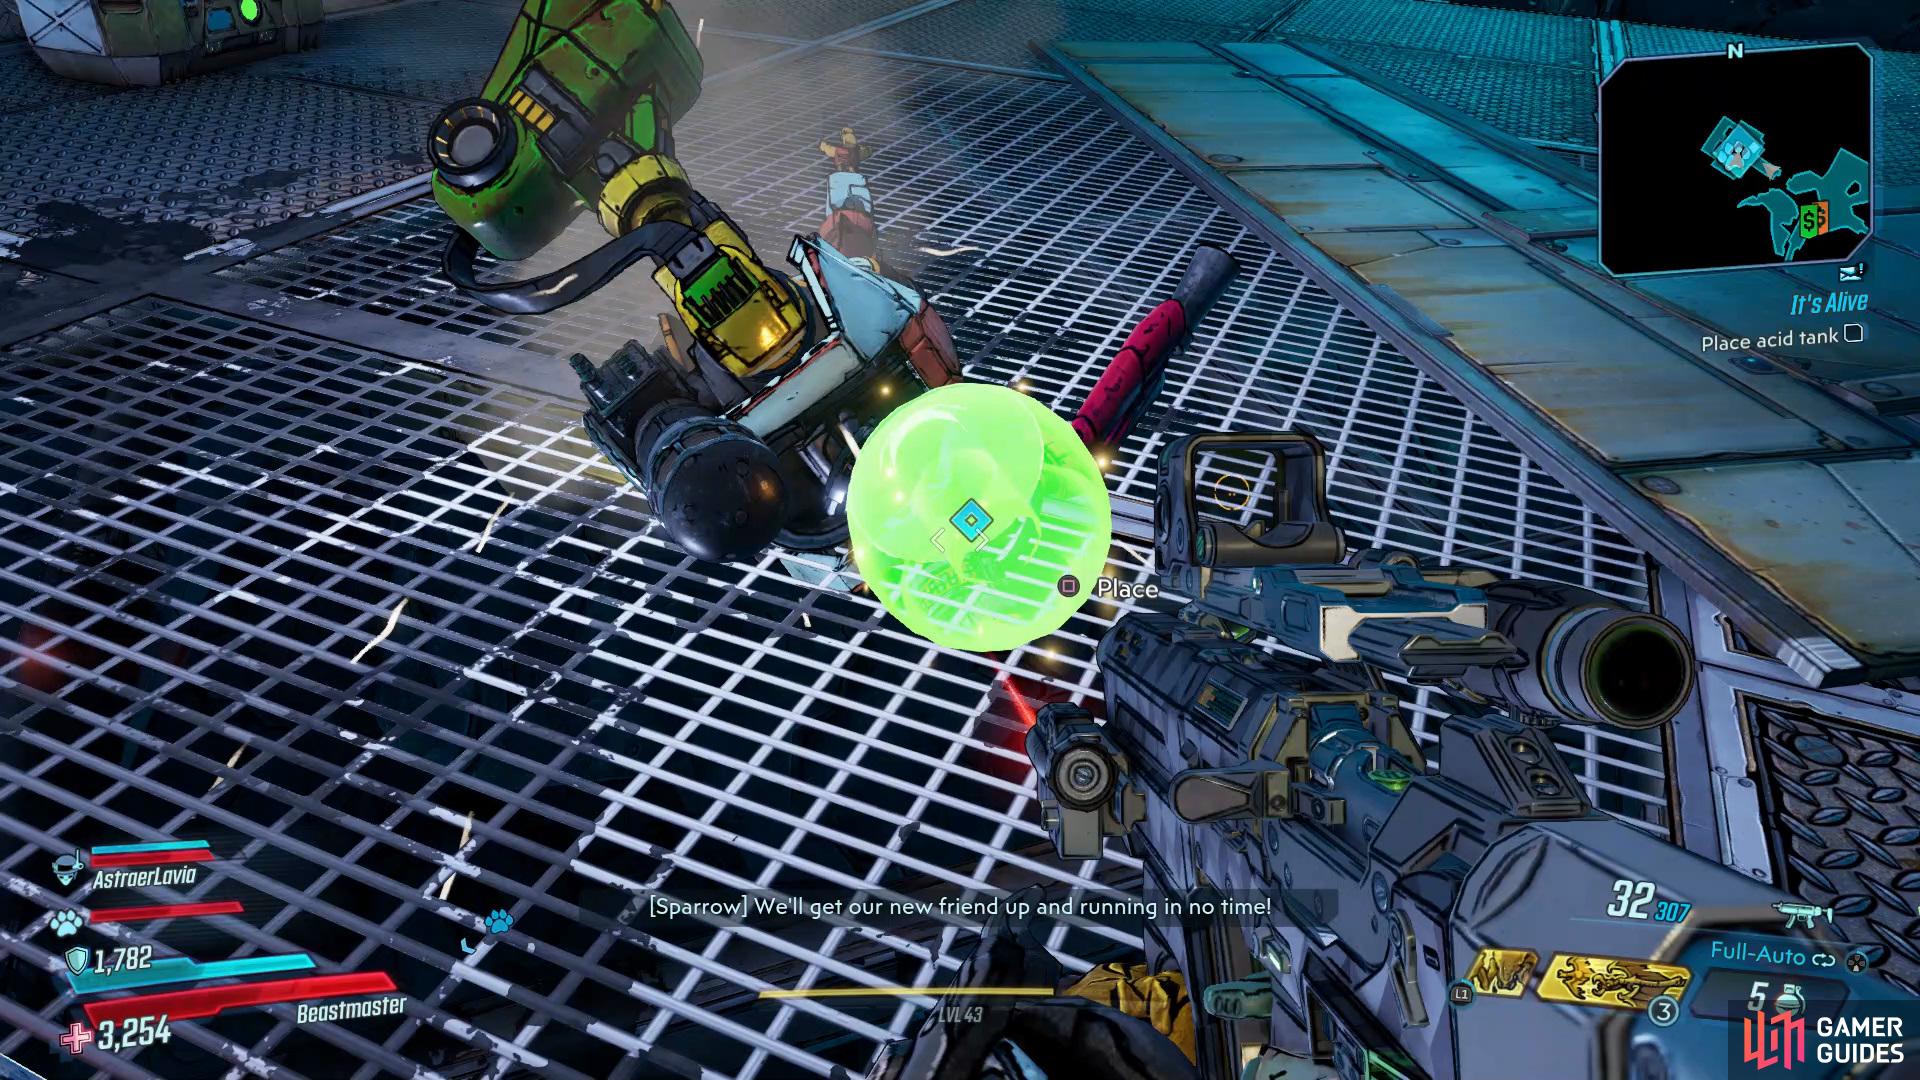 Connect the Acid Tank to the robot on the floor and melee it in.